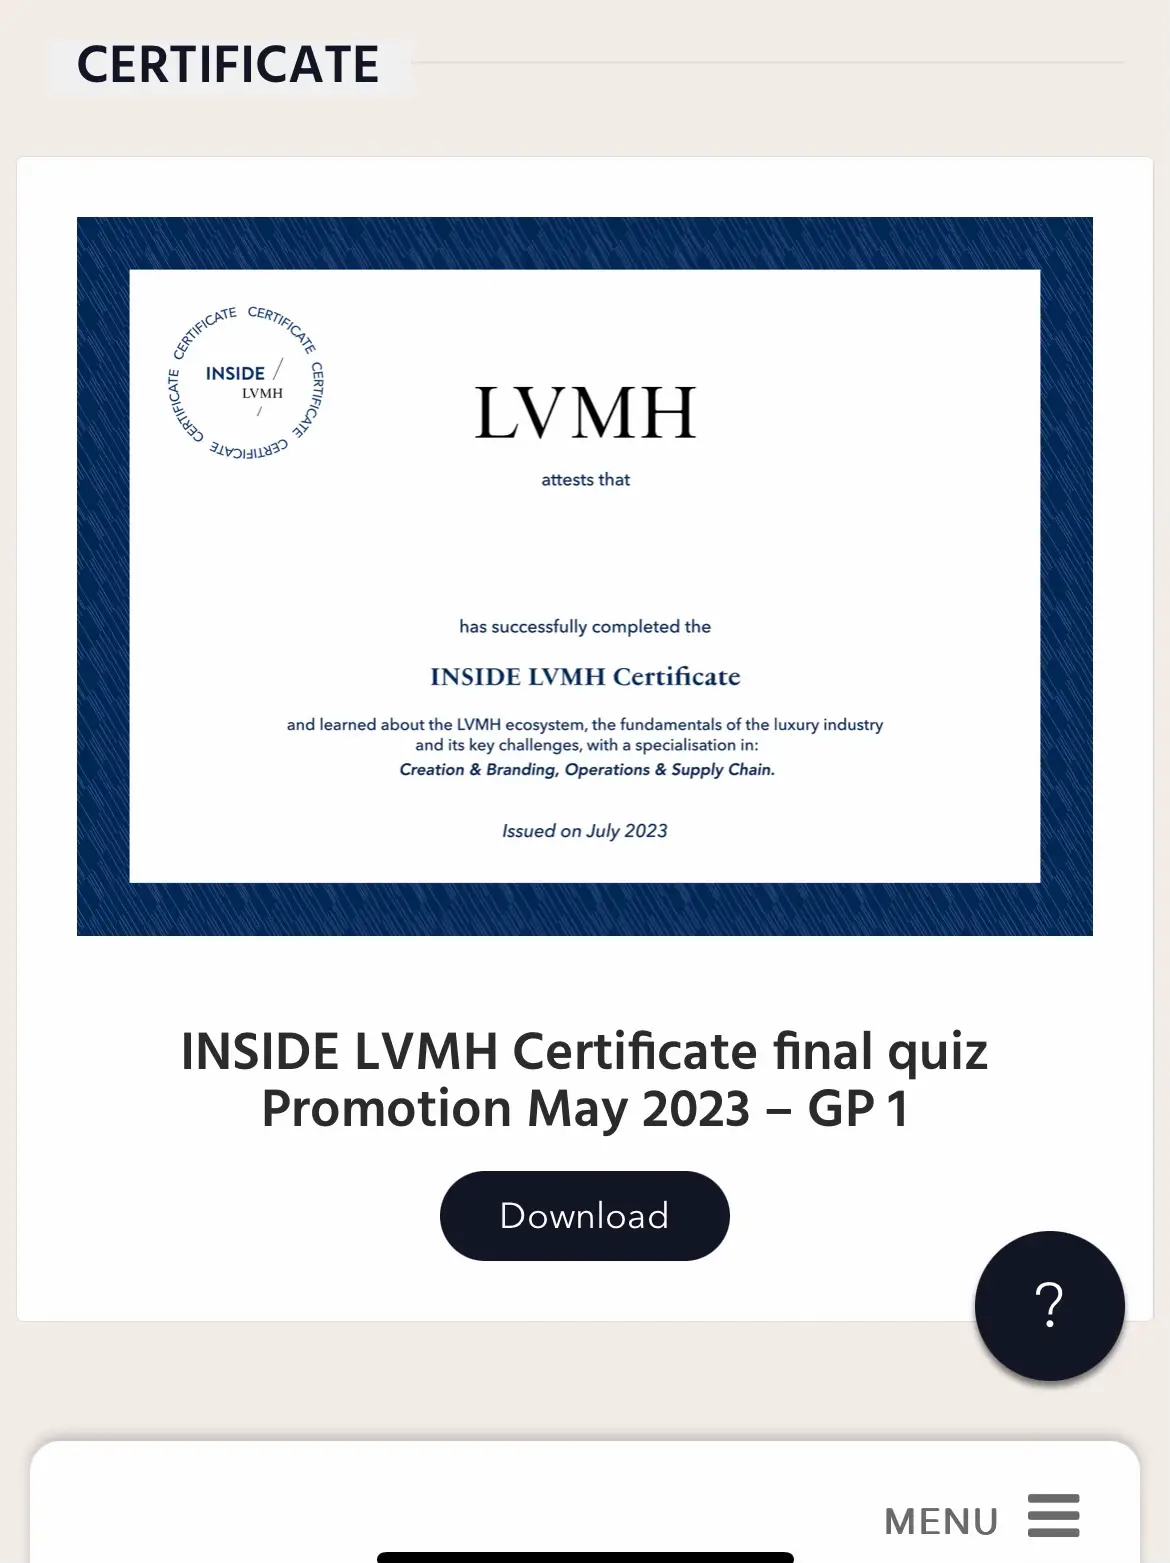 #selfdev, DID YOU KNOW? Free Certificate by LVMH